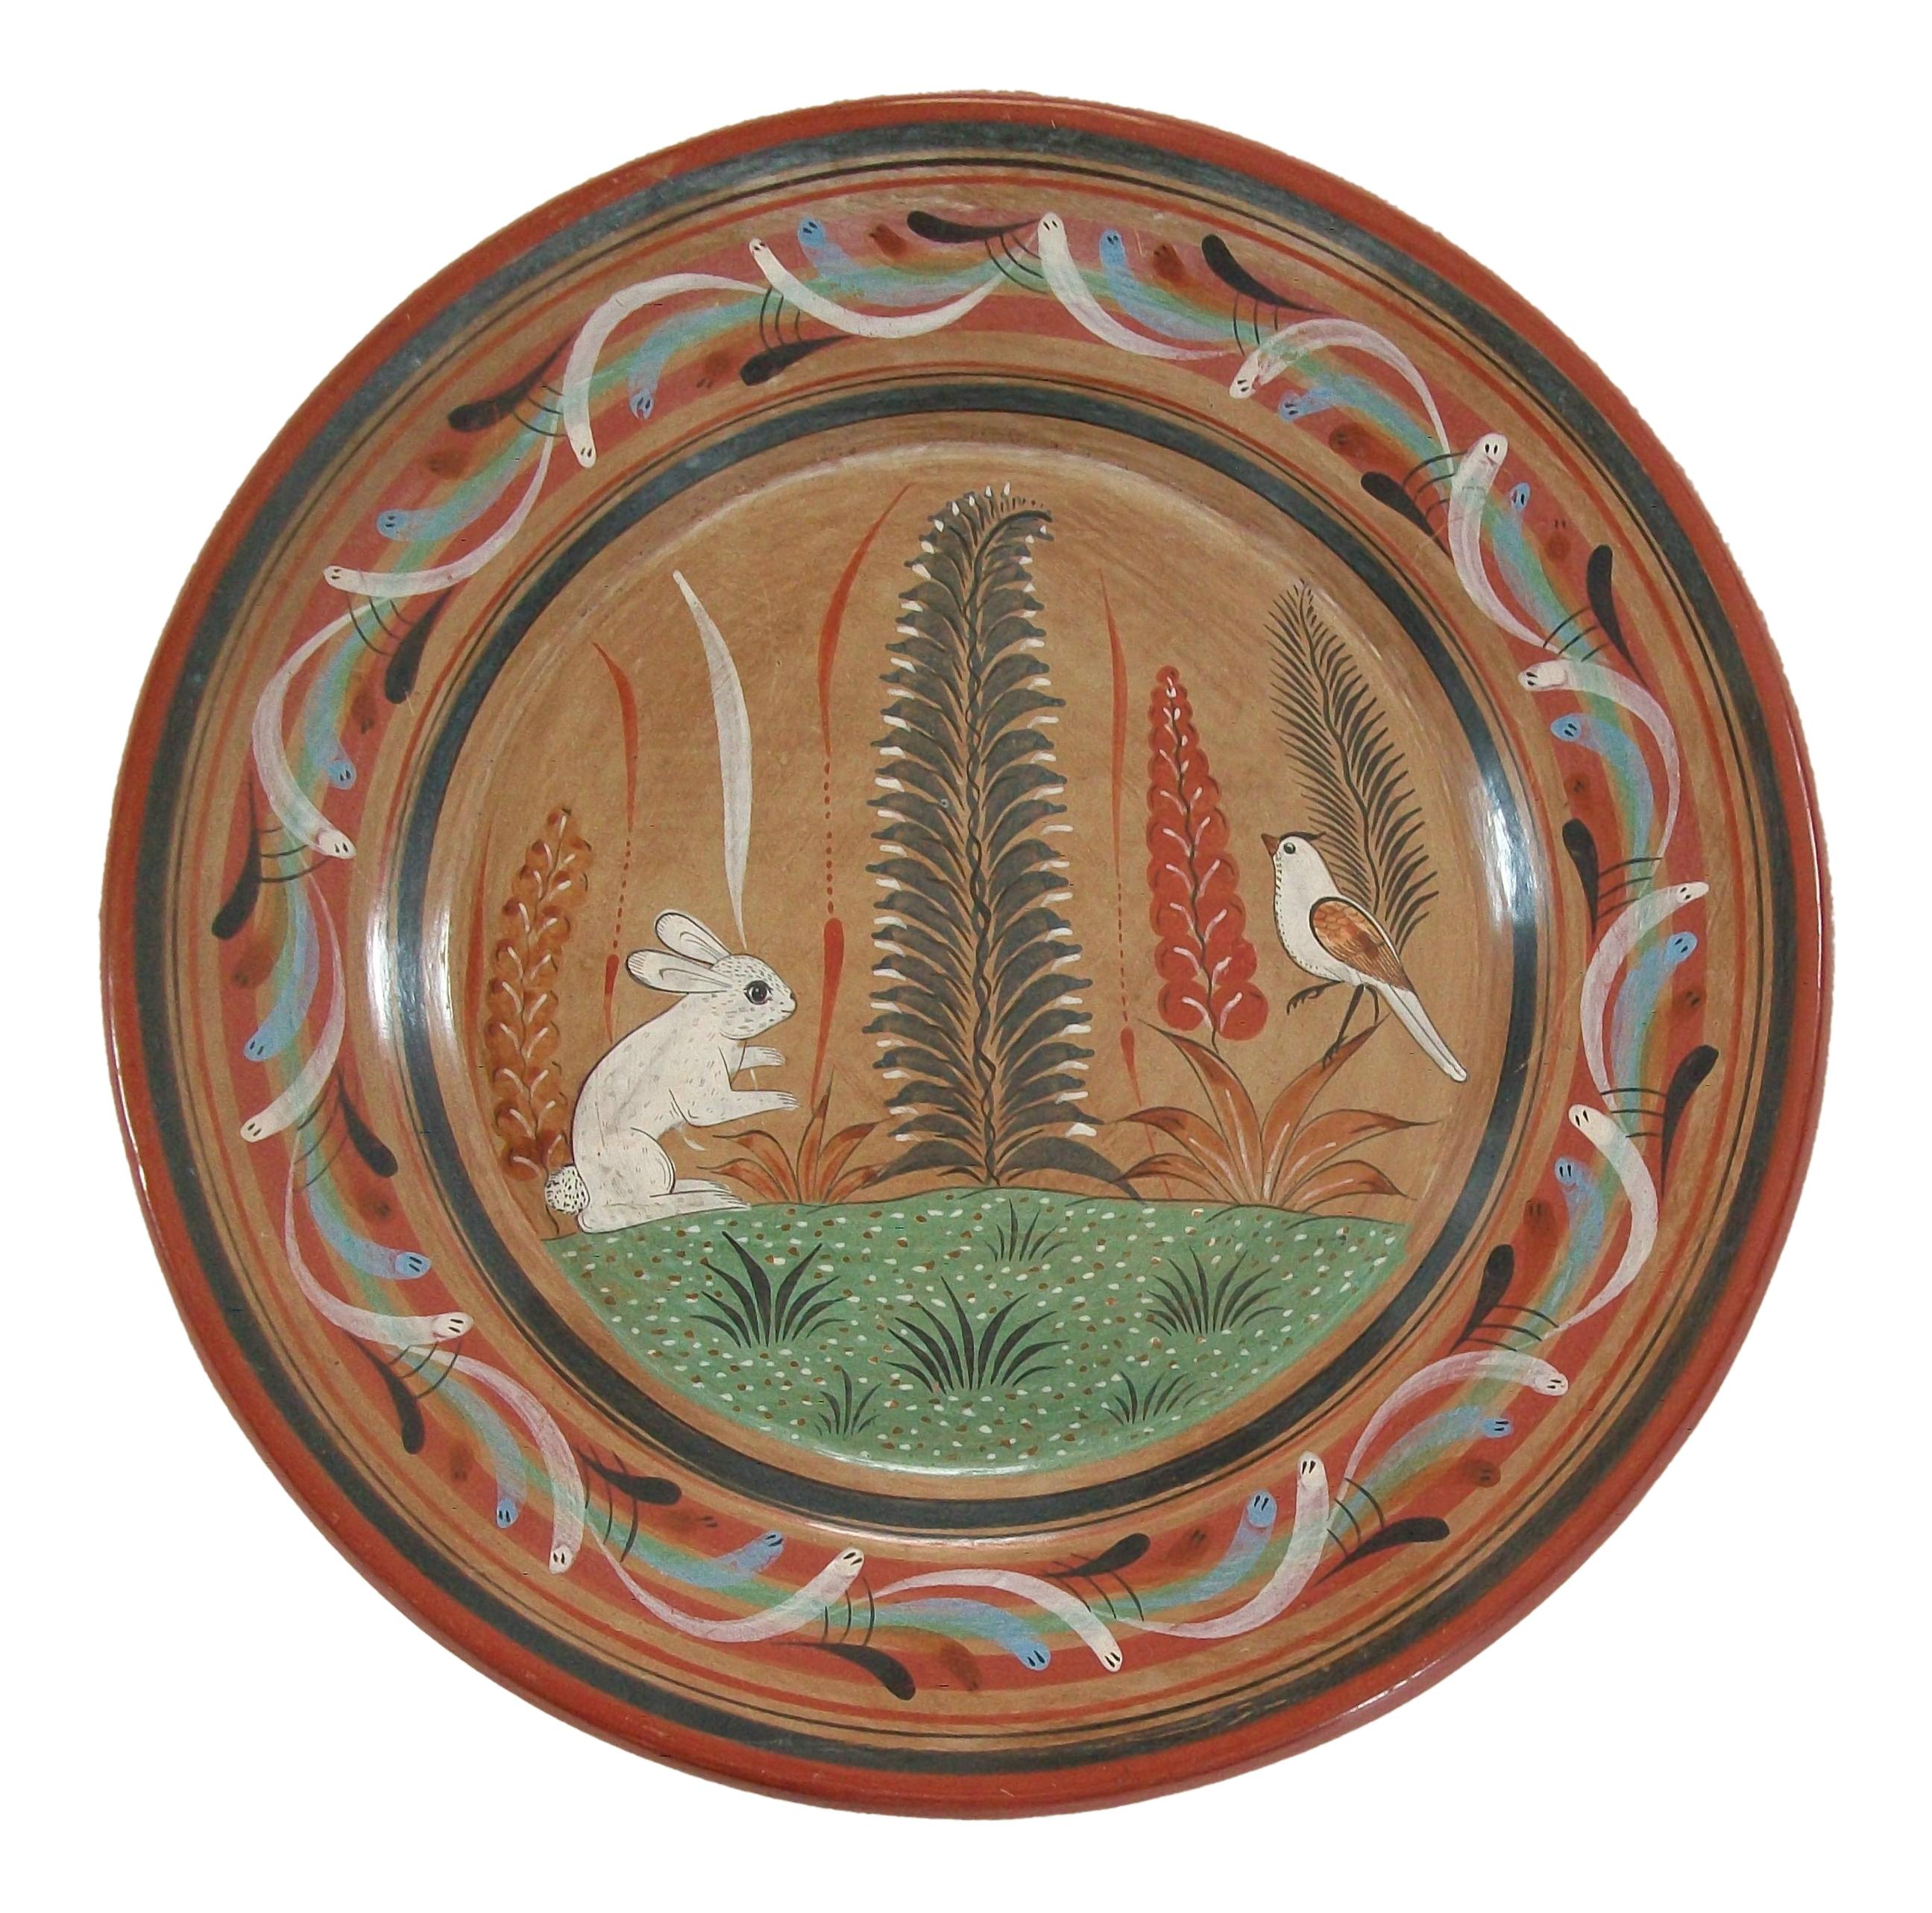 Tonala folk art pottery charger or wall plate - large size - hand made and hand painted with a rabbit, bird and foliage - elaborate border - unsigned - Mexico - circa 1970's. 

Excellent vintage condition - no loss - no damage - no restoration -